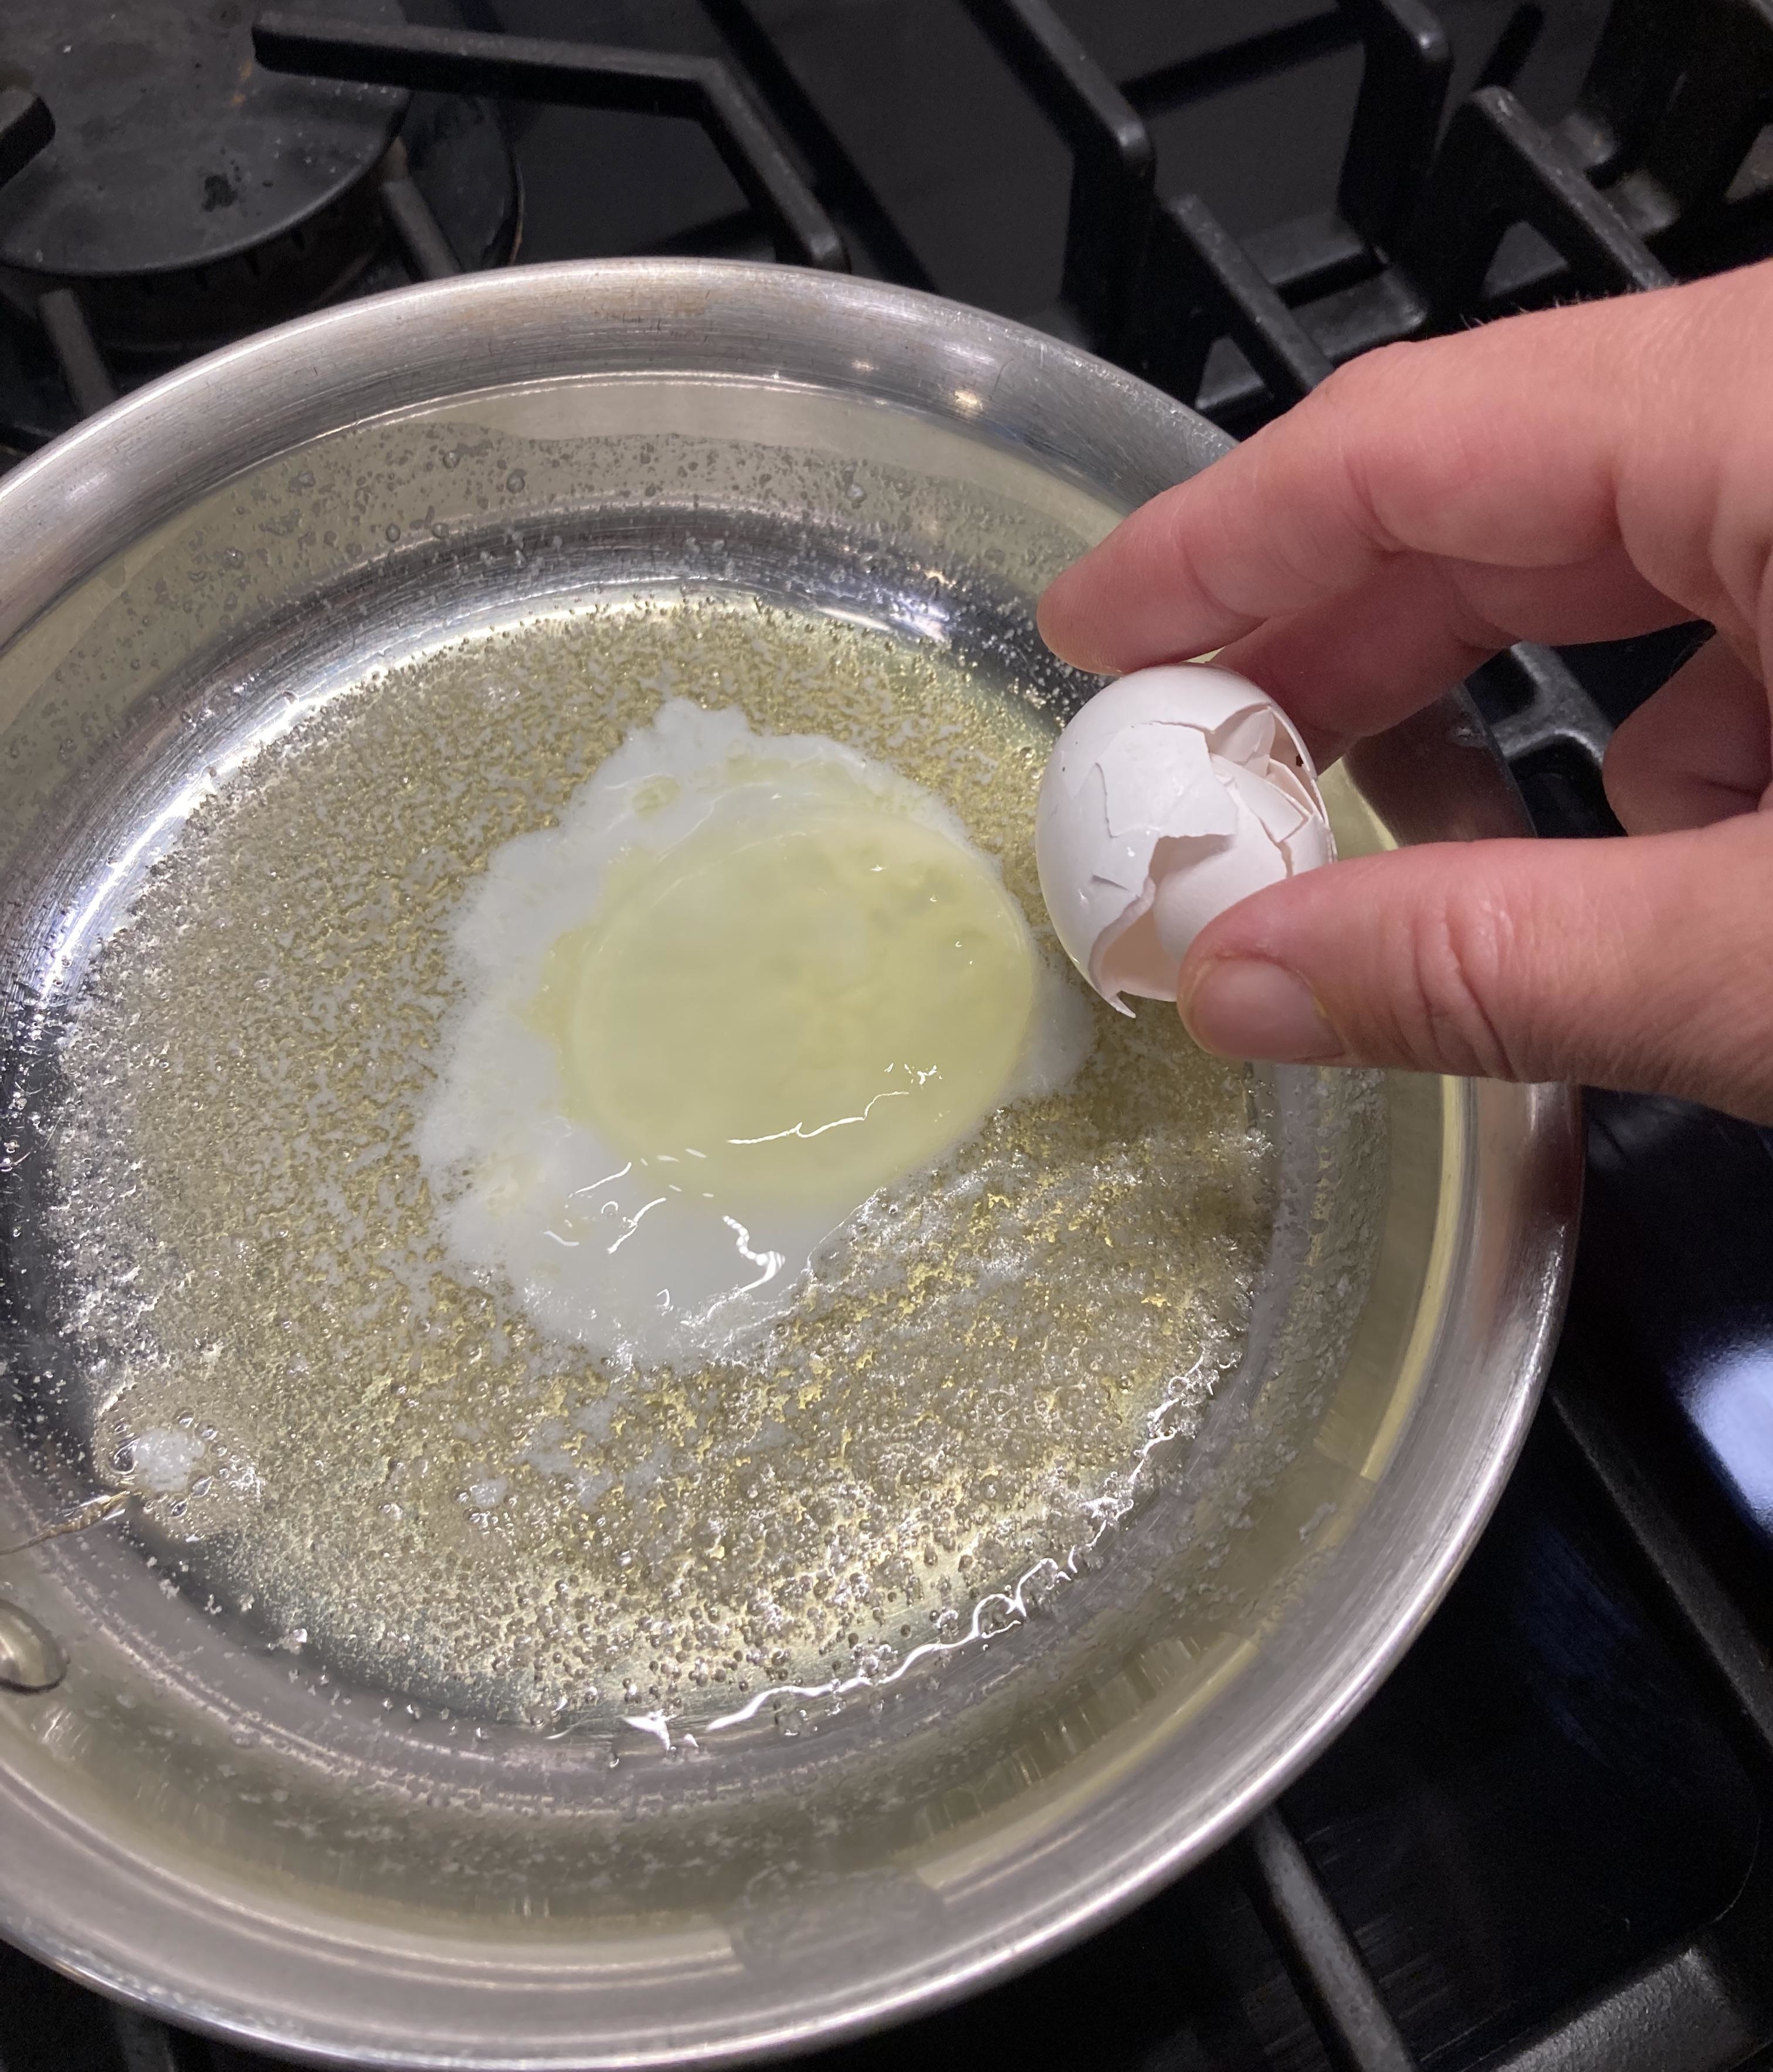 A person cracking an egg into a hot pan for cooking